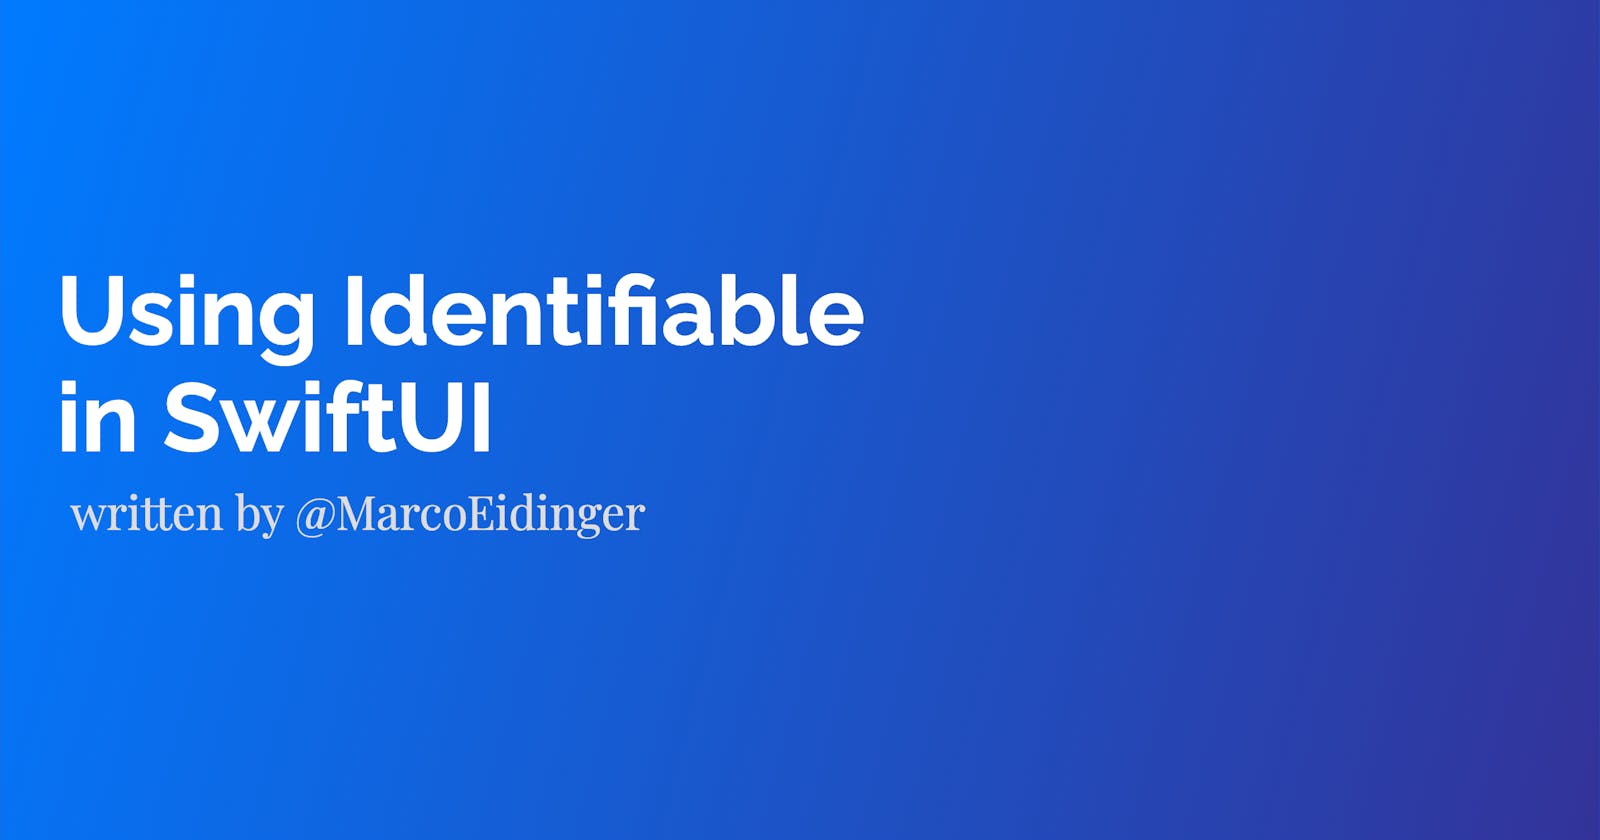 Using Identifiable in SwiftUI